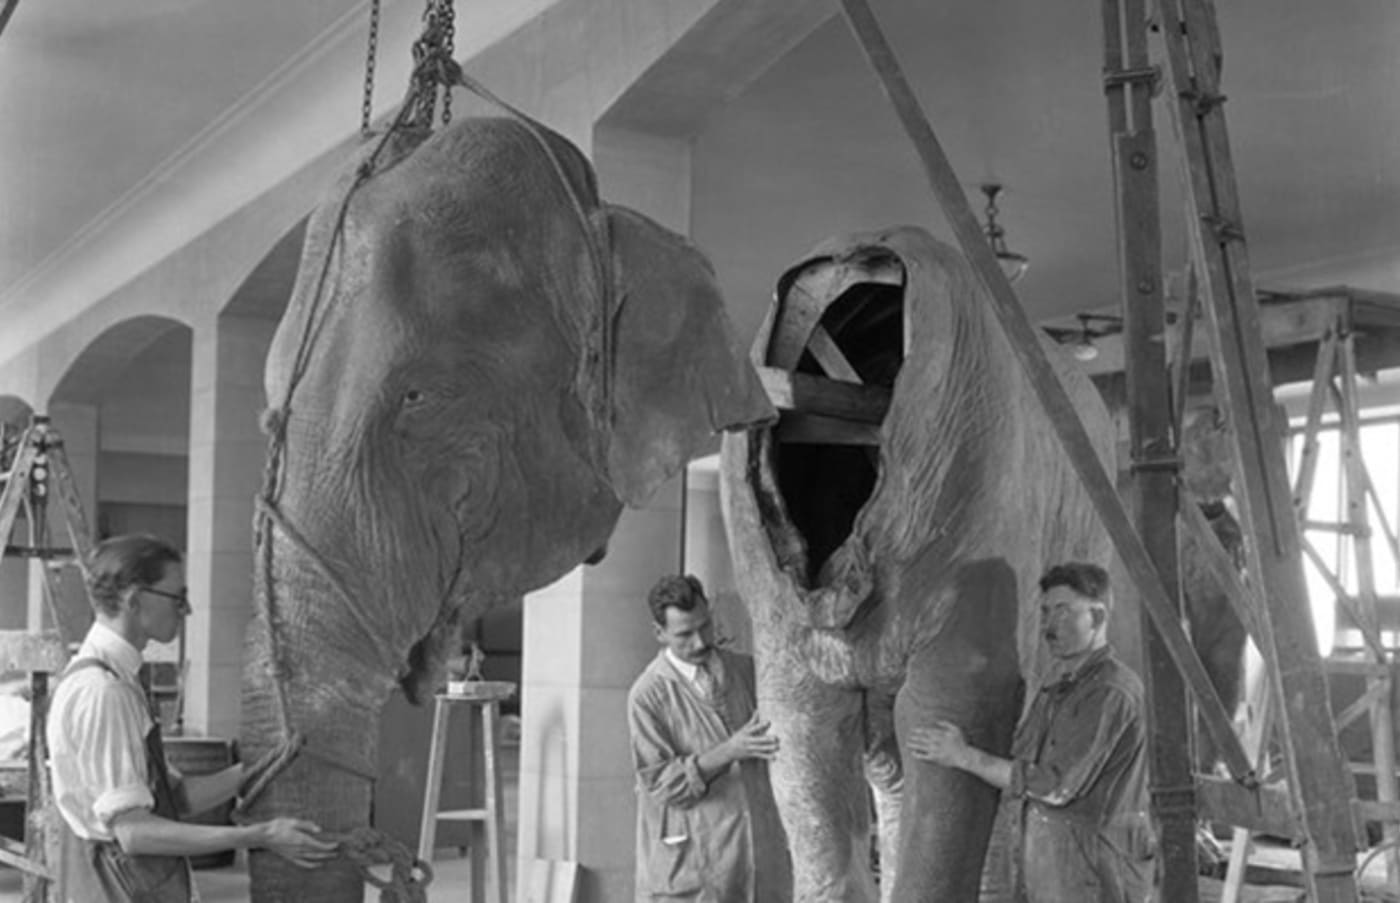 Photos Reveal Behind The Scenes At The American Museum Of Natural